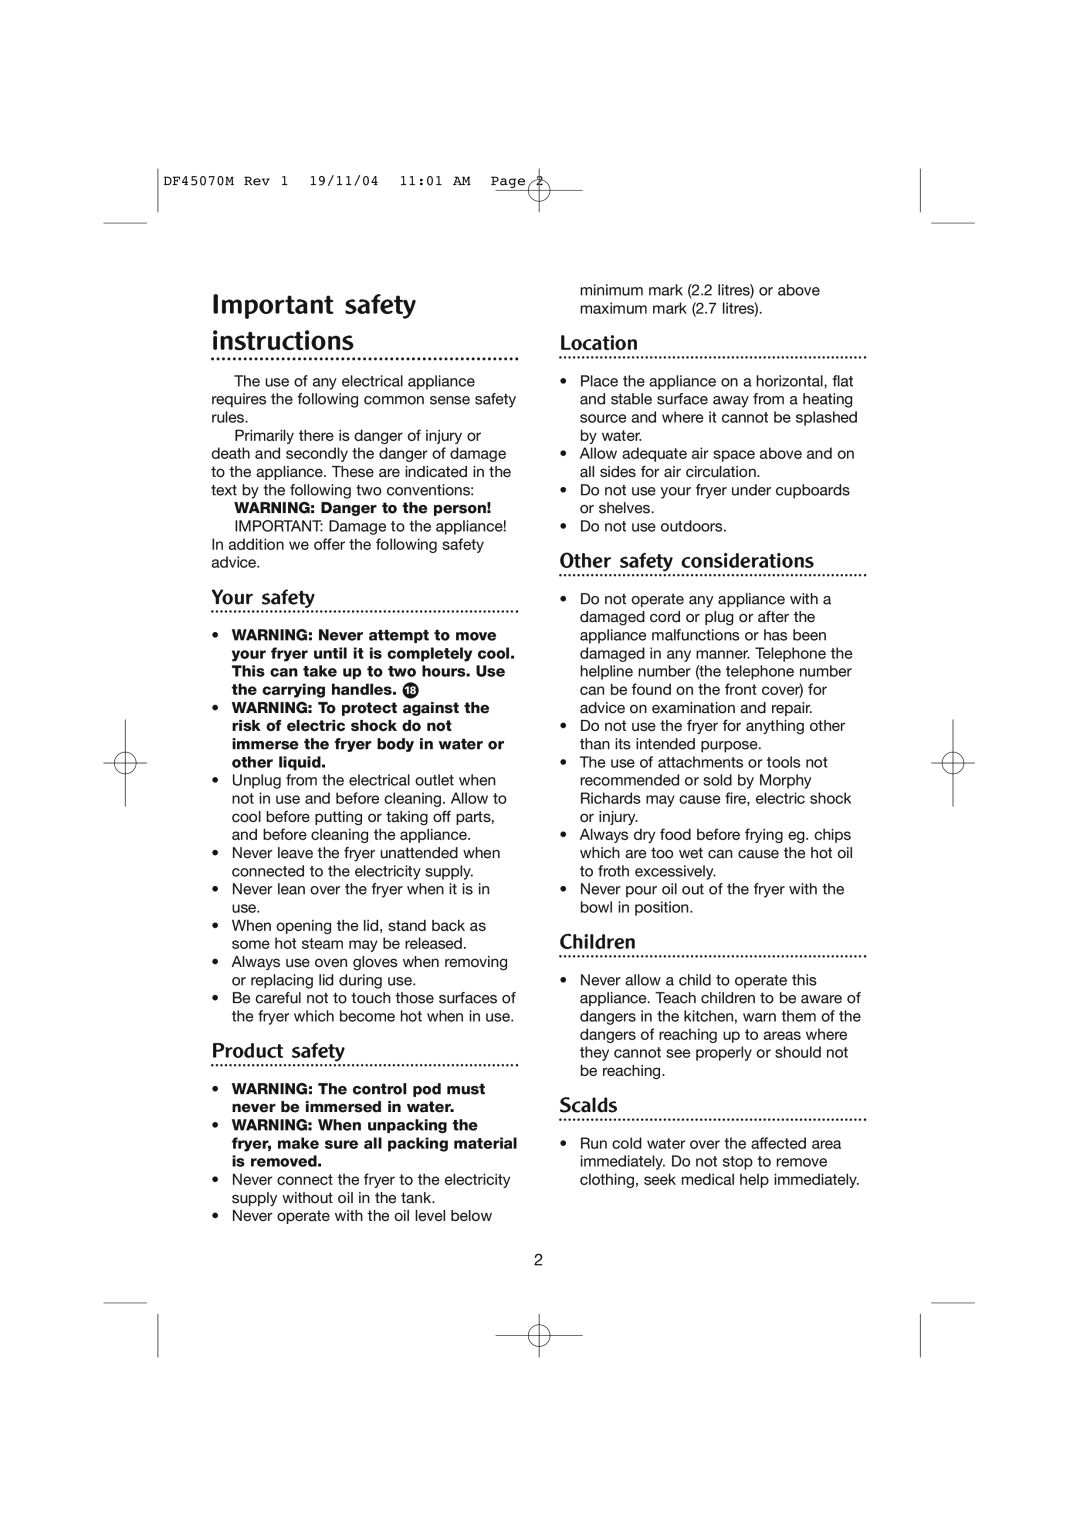 Morphy Richards DF45070M Important safety instructions, Your safety, Product safety, Location, Other safety considerations 